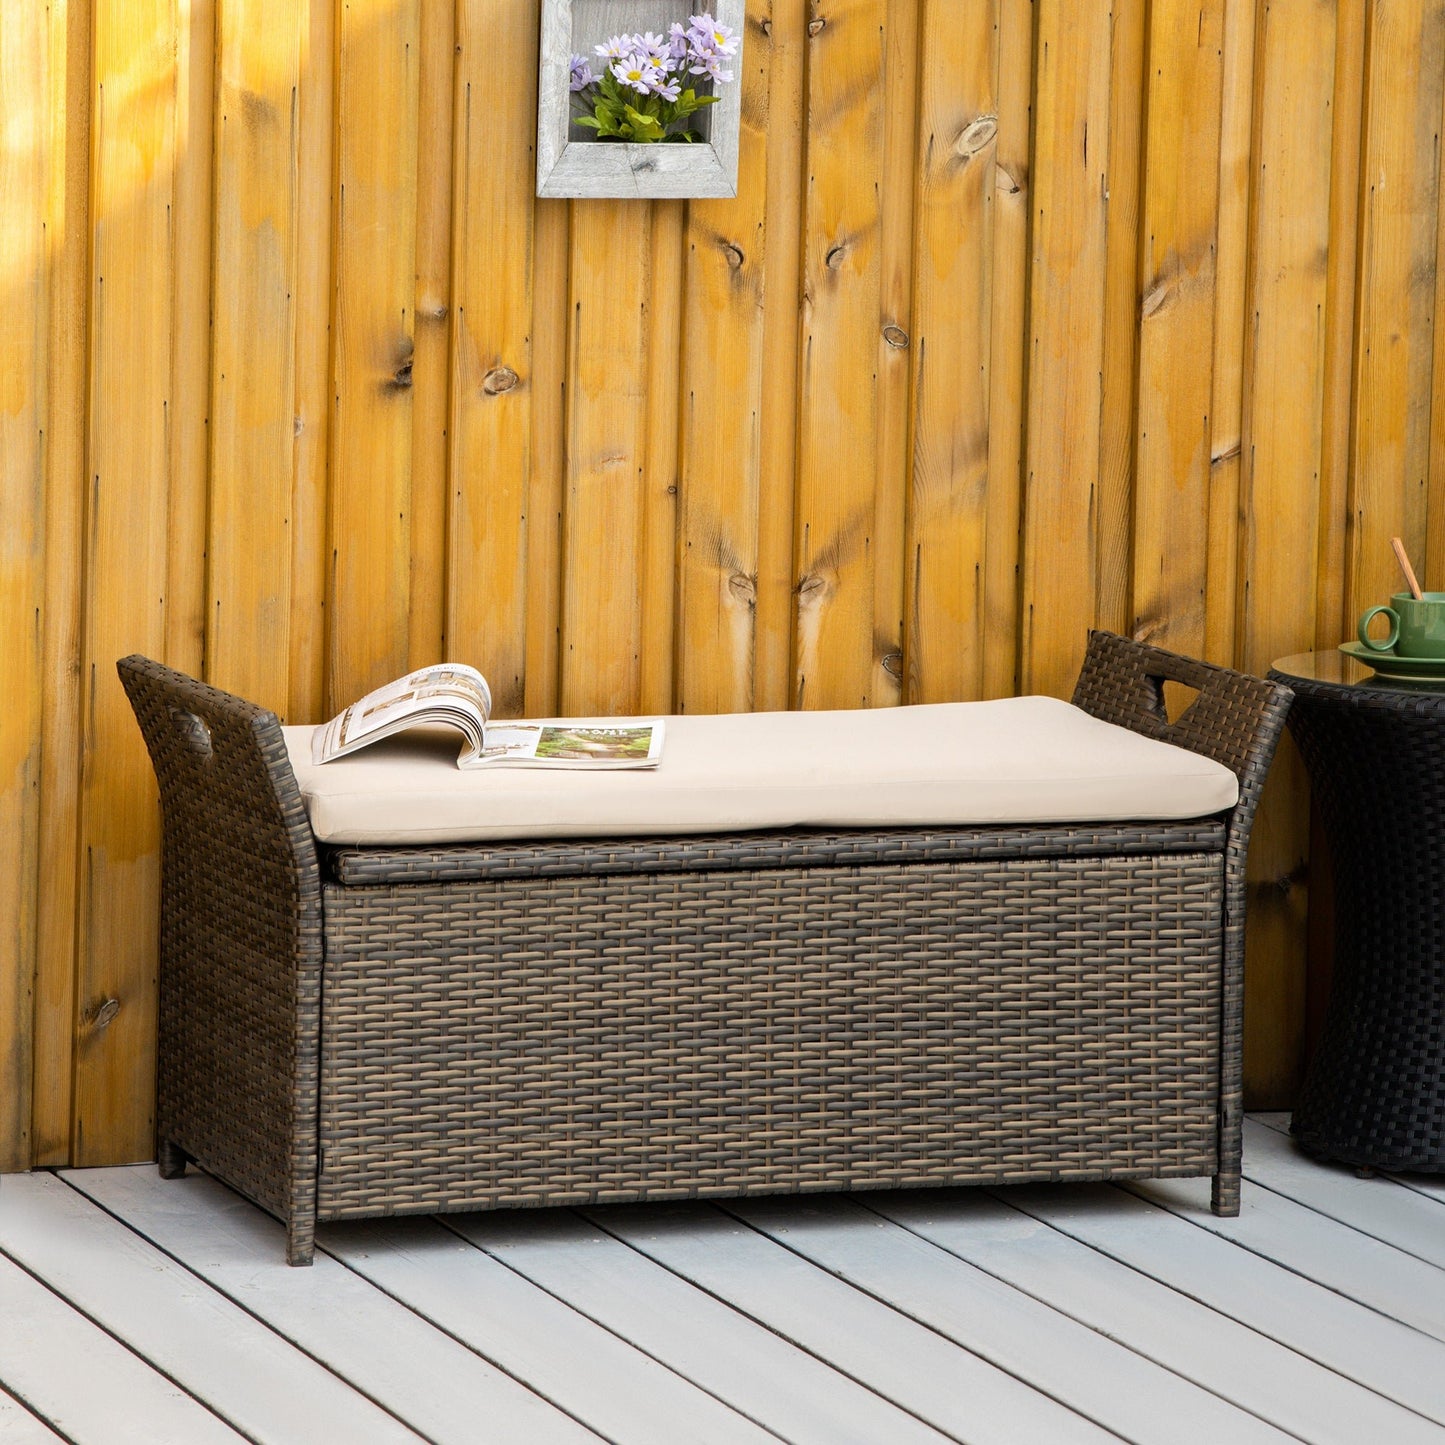 Outdoor and Garden-Patio Wicker Storage Bench, Outdoor PE Rattan Furniture, 2-In-1 Large Capacity Footstool Rectangle Basket Box, Cream White - Outdoor Style Company